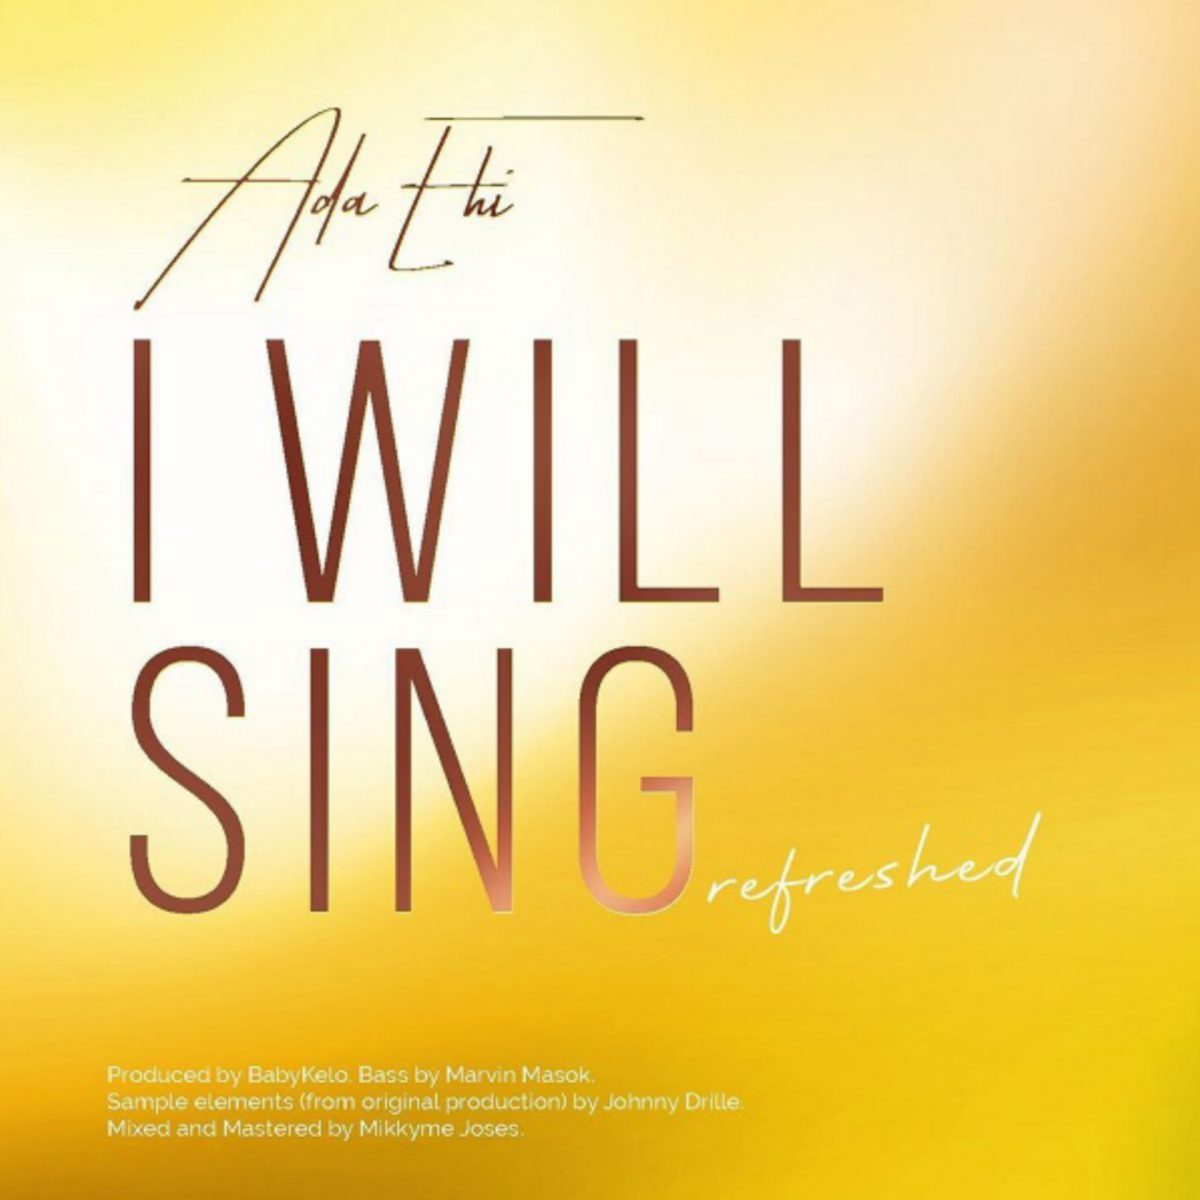 I Will Sing By Ada Ehi (Refreshed)